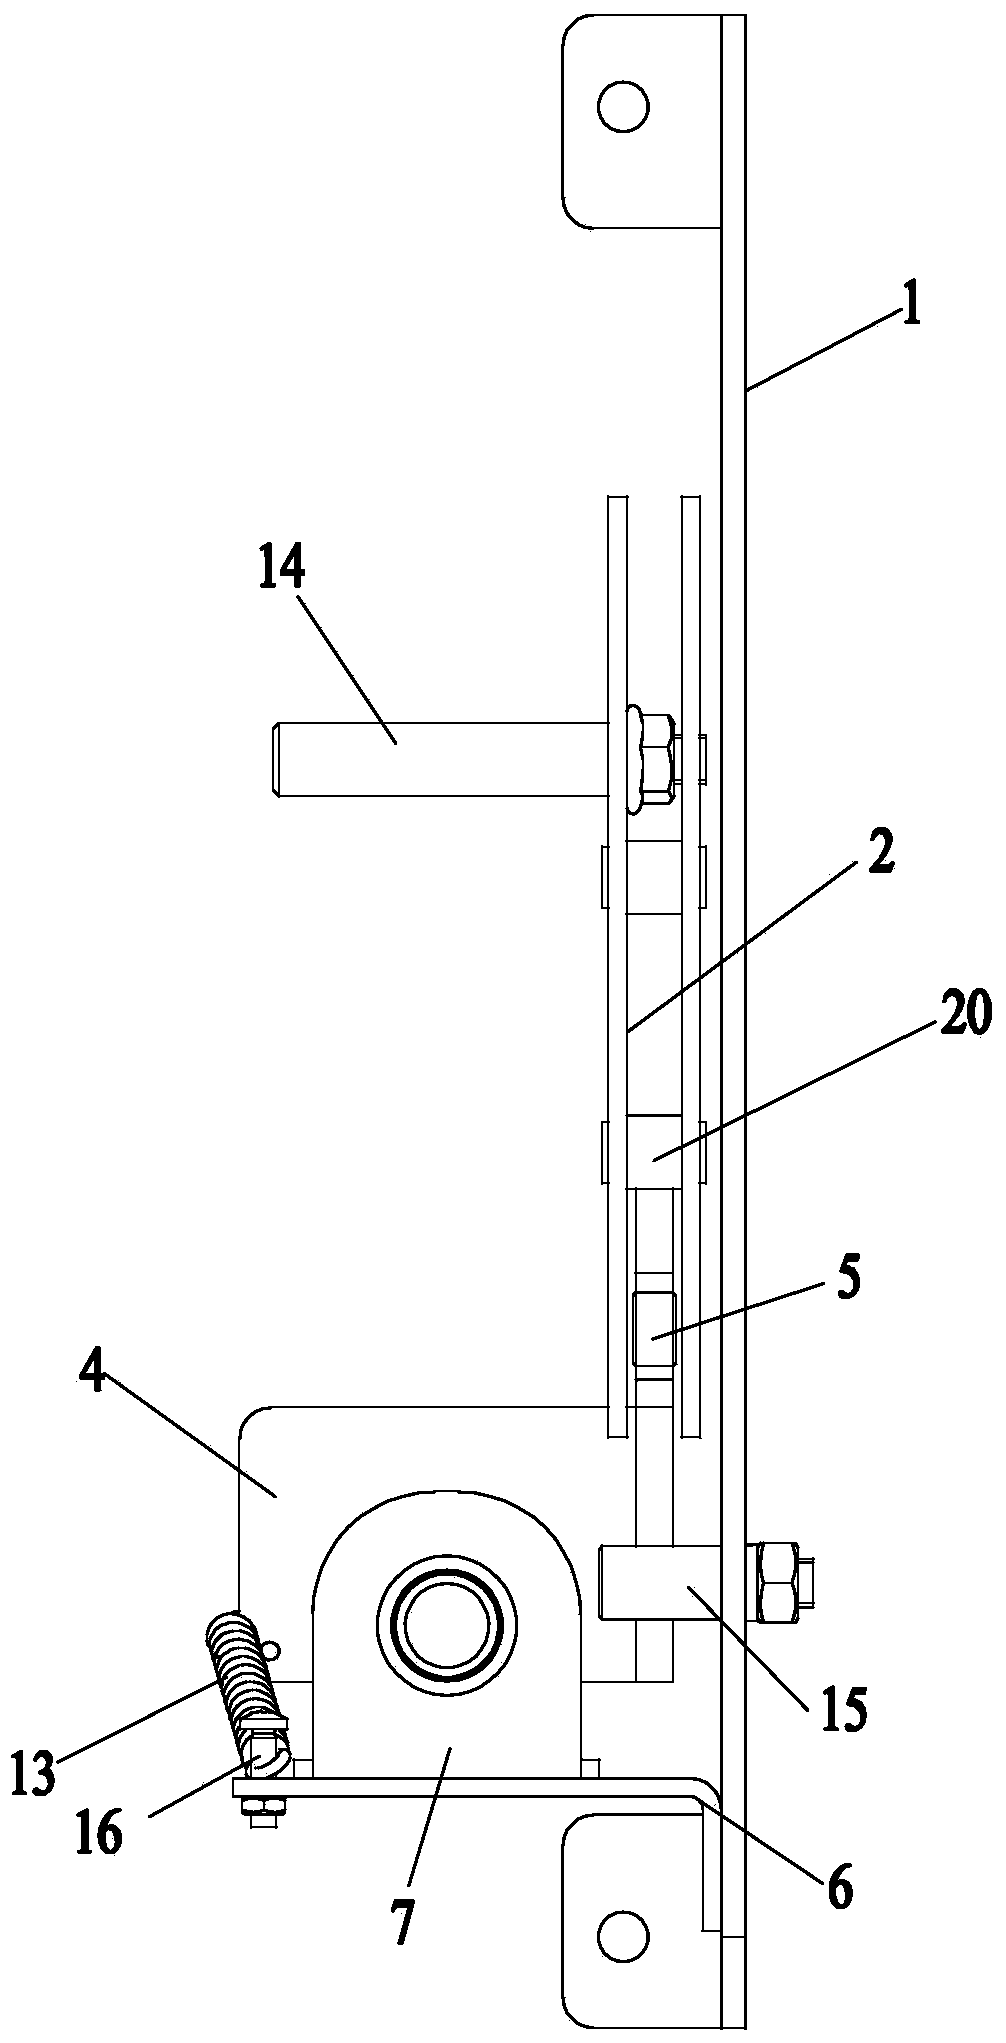 Buckling and tripping device for automatic transfer switching equipment